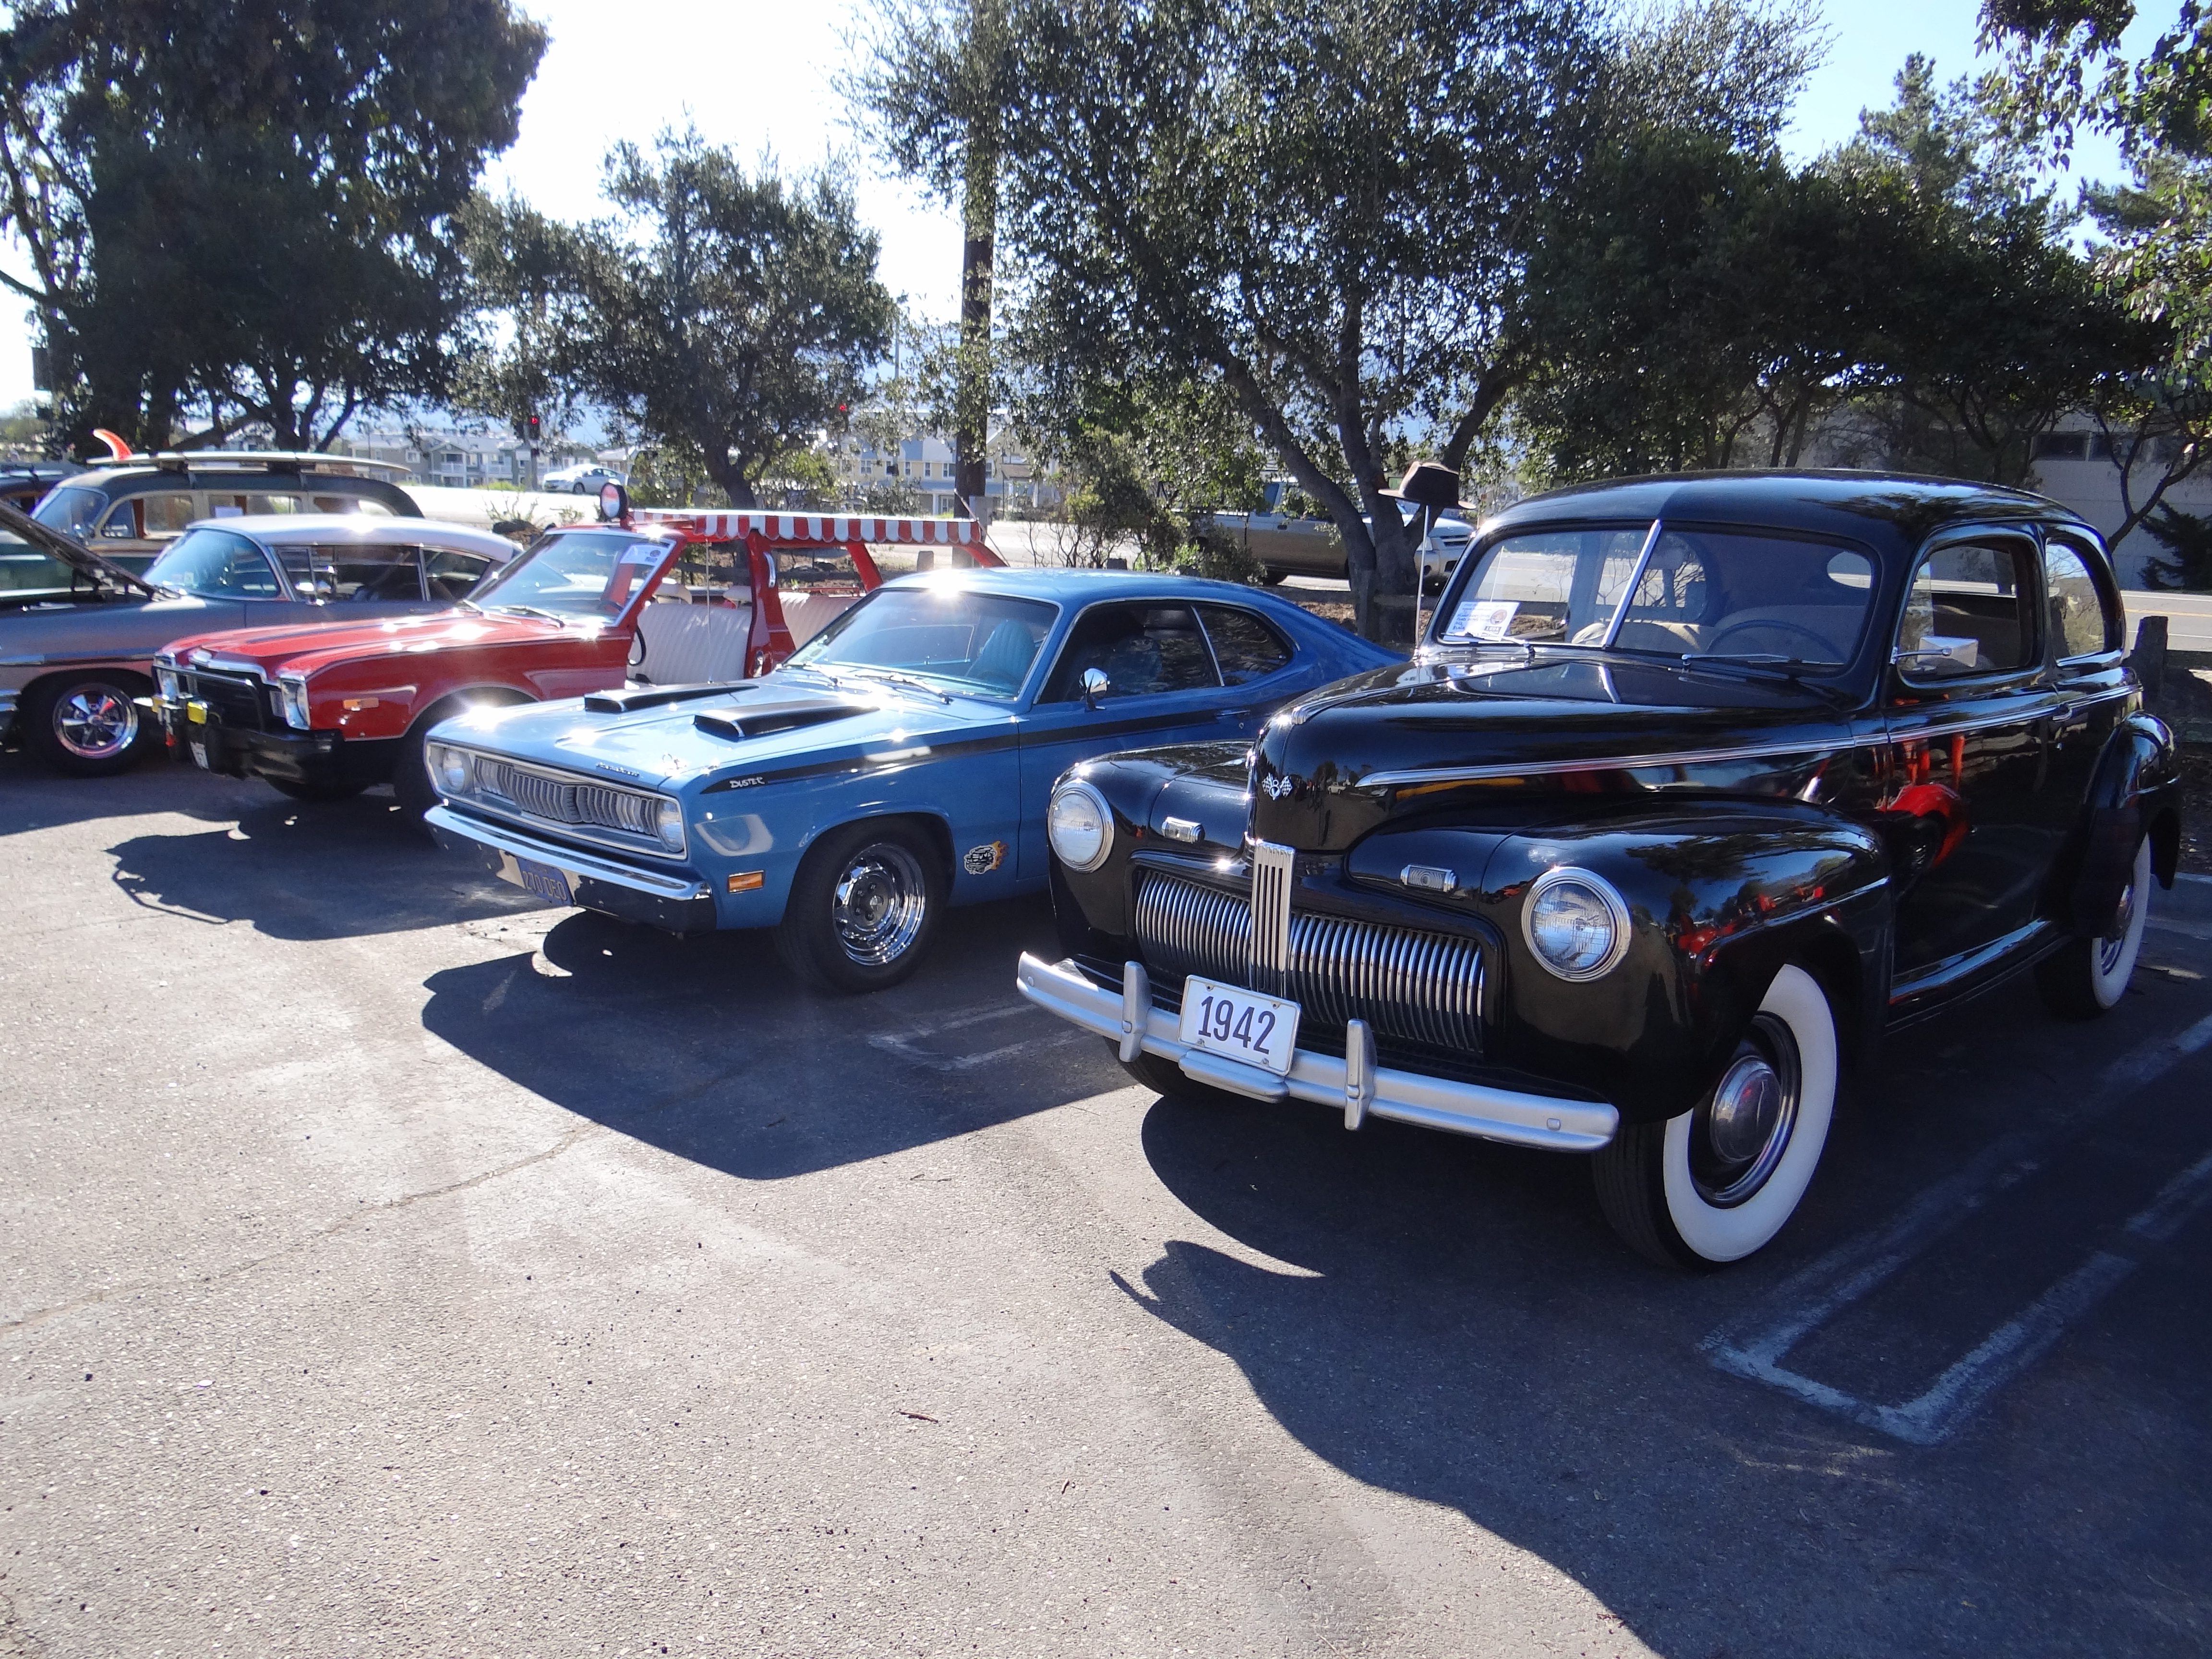 Pirate treasure abounds at SYVHS car show